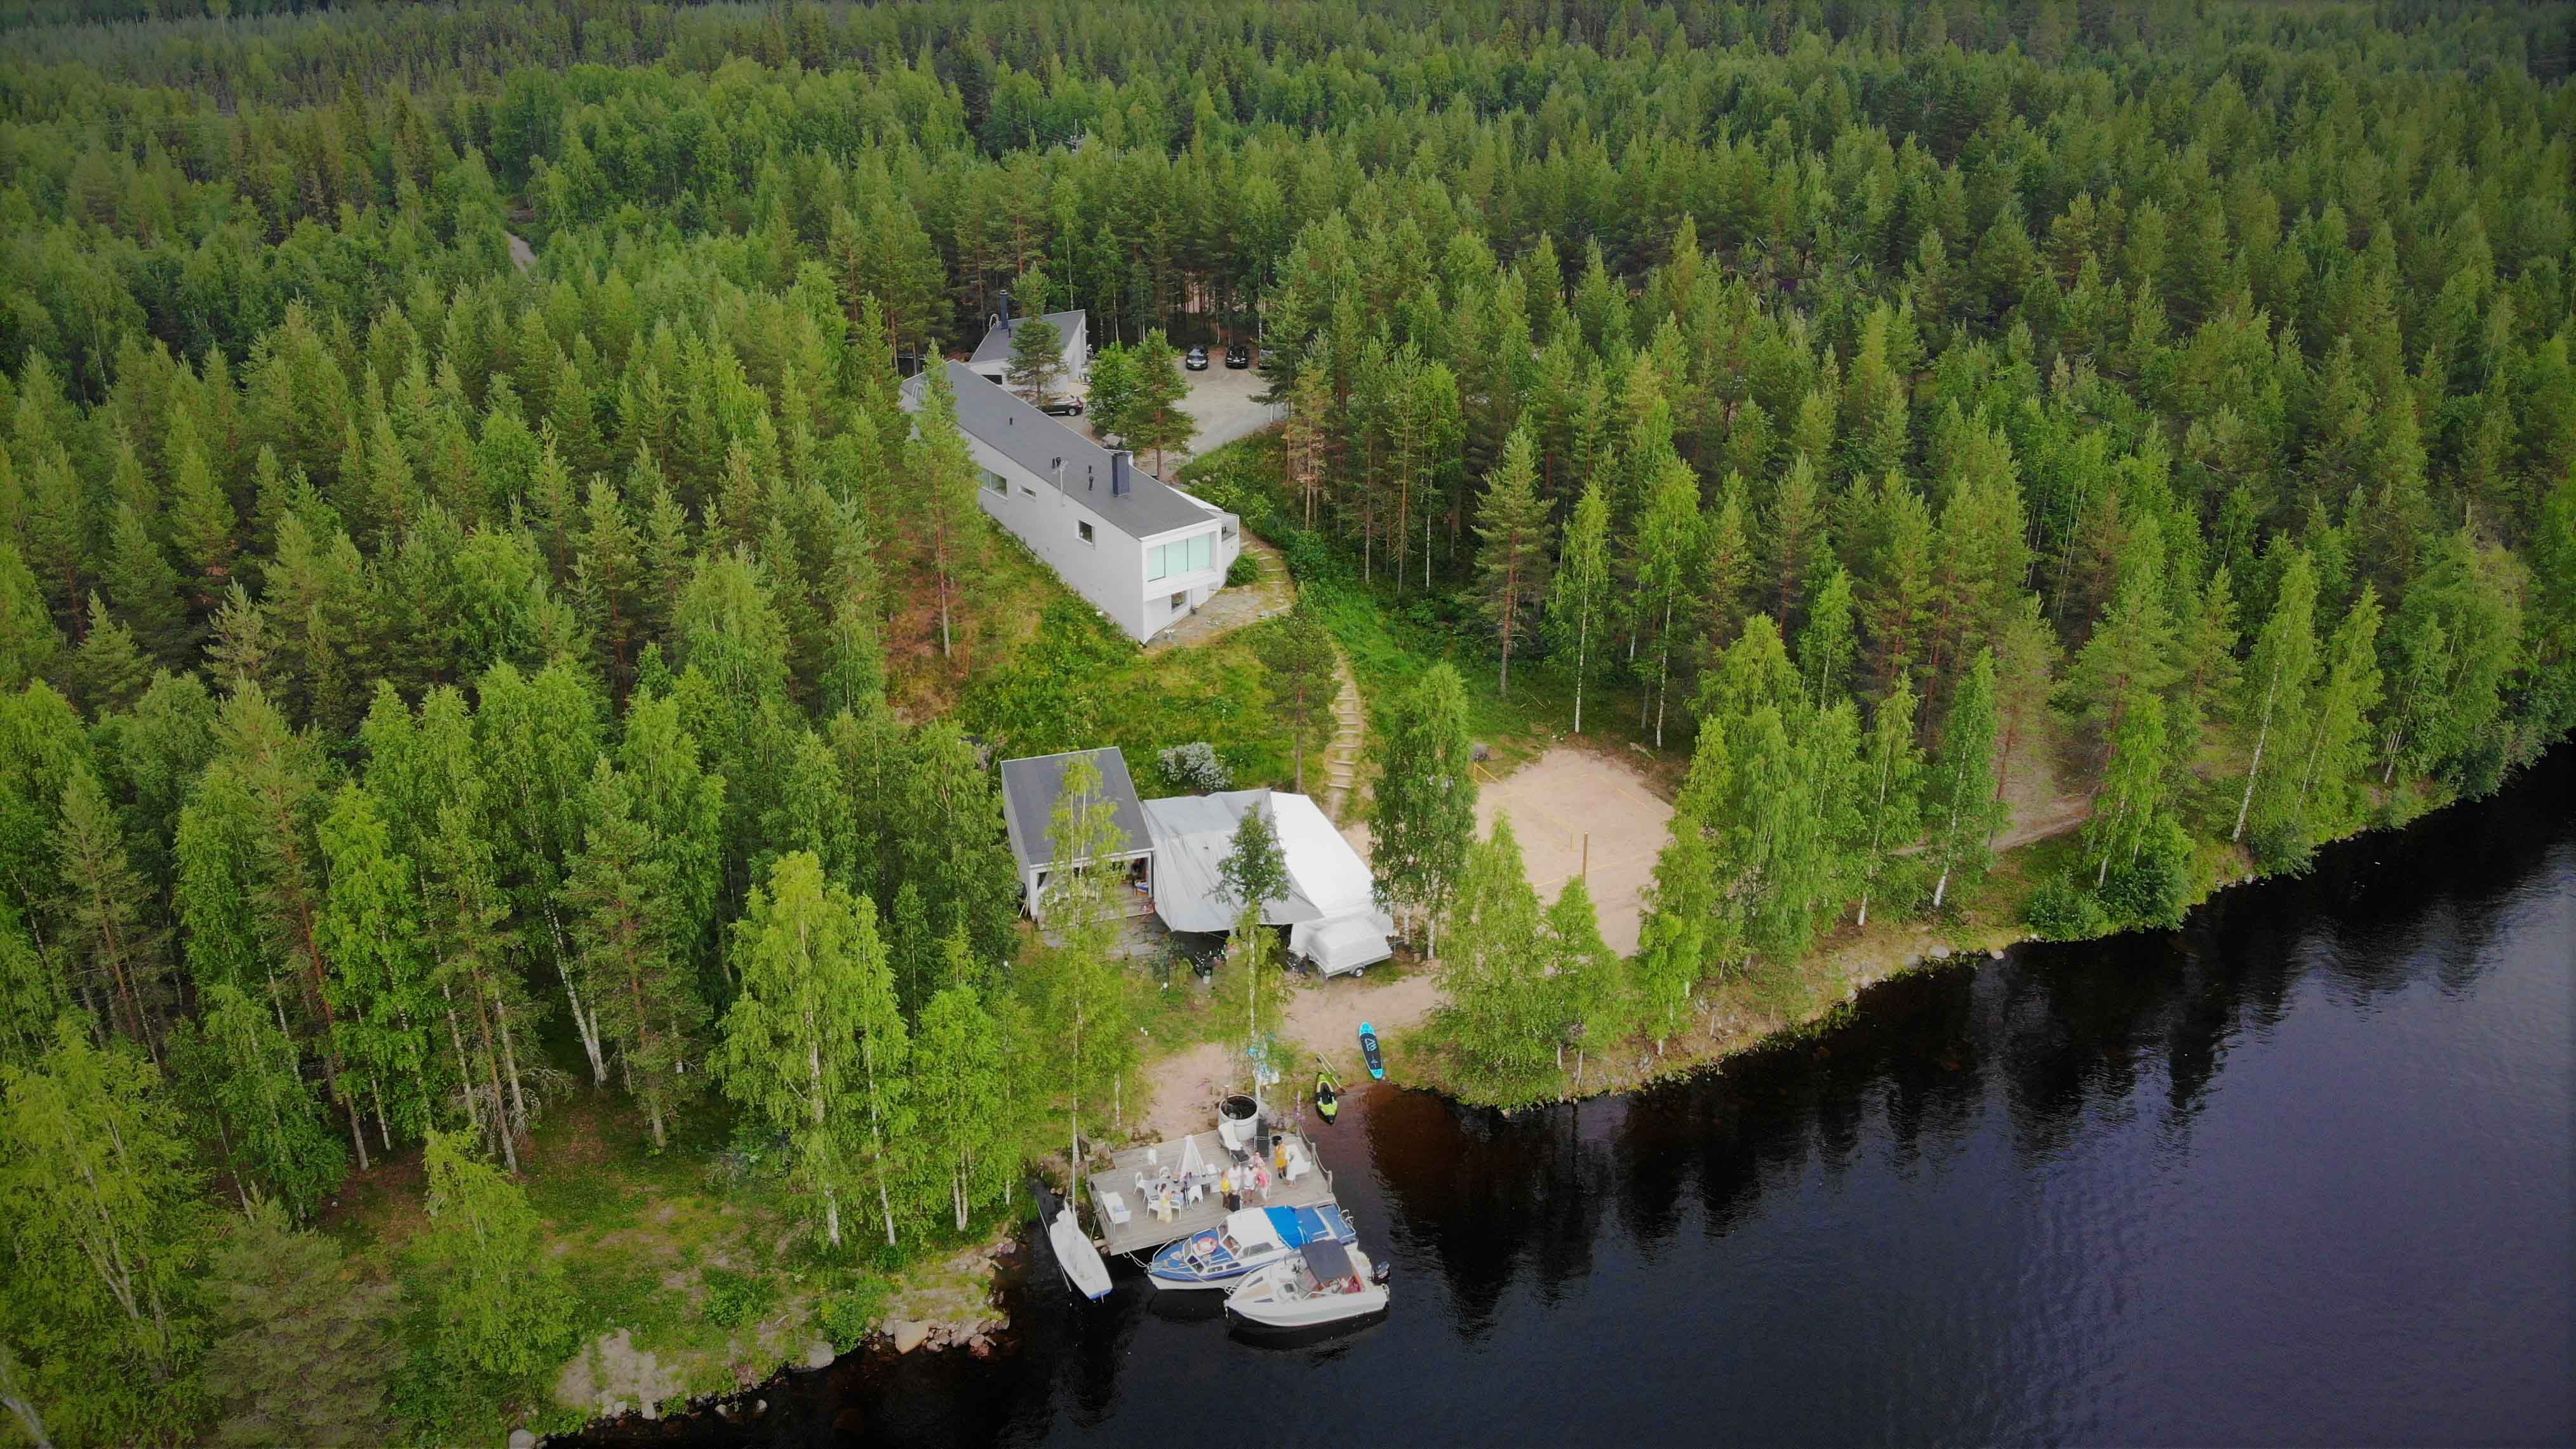 Villa Wiima is located in privacy of Lappish wilderness.